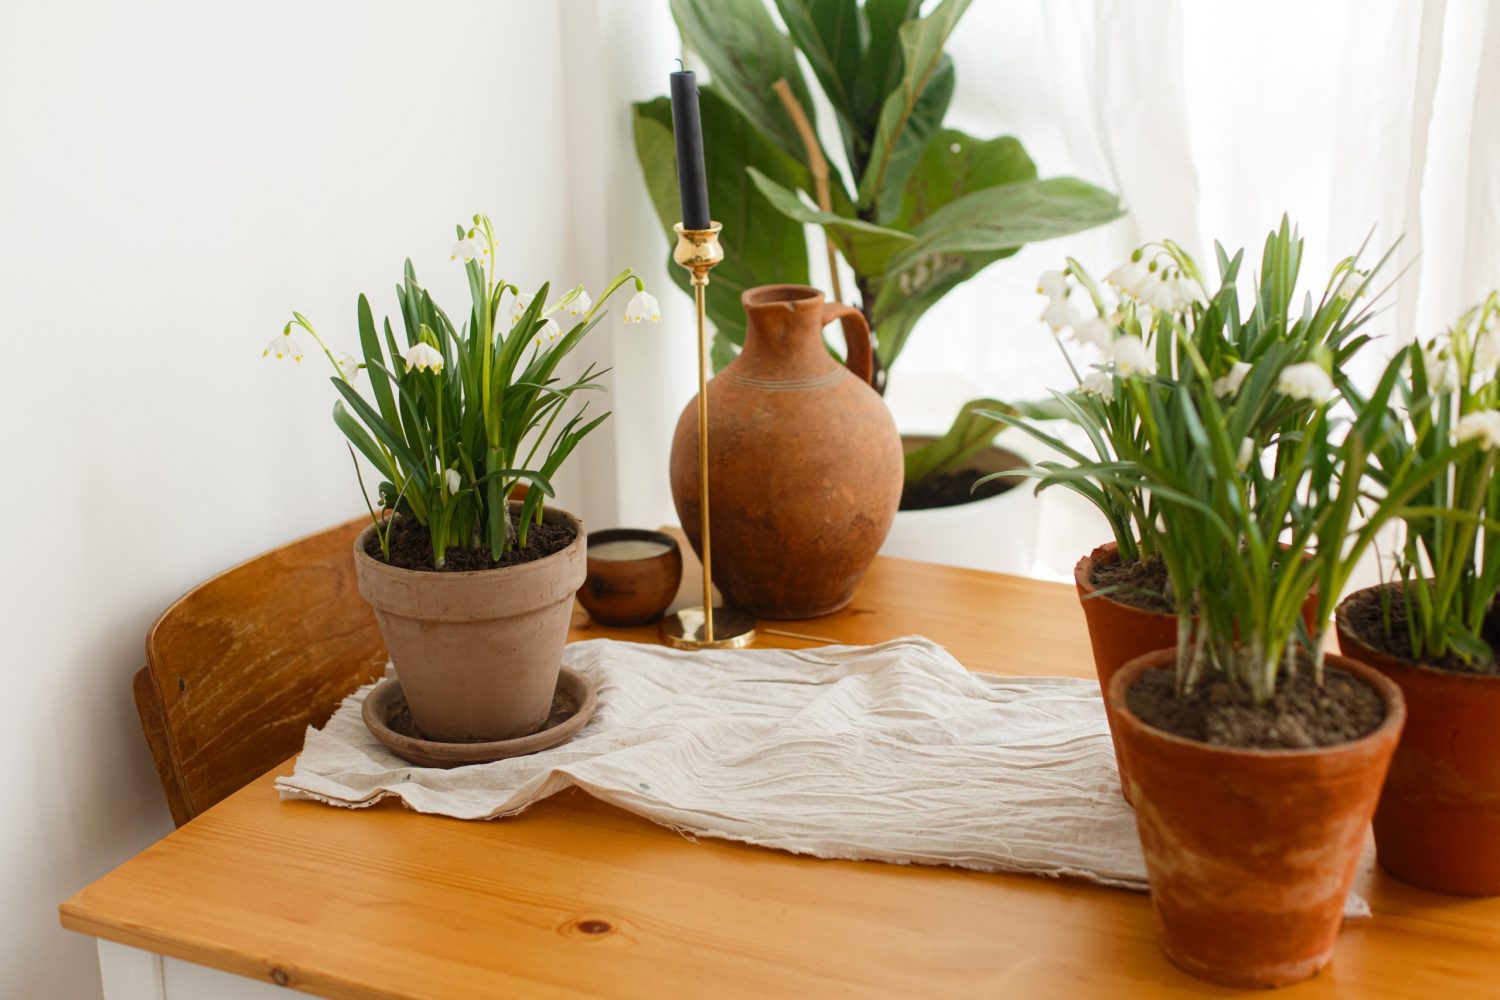 Several terracotta planters planted with flowers sit atop a wooden table, alongside a large terracotta water jug, a brass candlestick, a small terracotta bowl, and a cream linen cloth strip. In the background is a tall fiddle leaf fig in a wide, white planter.